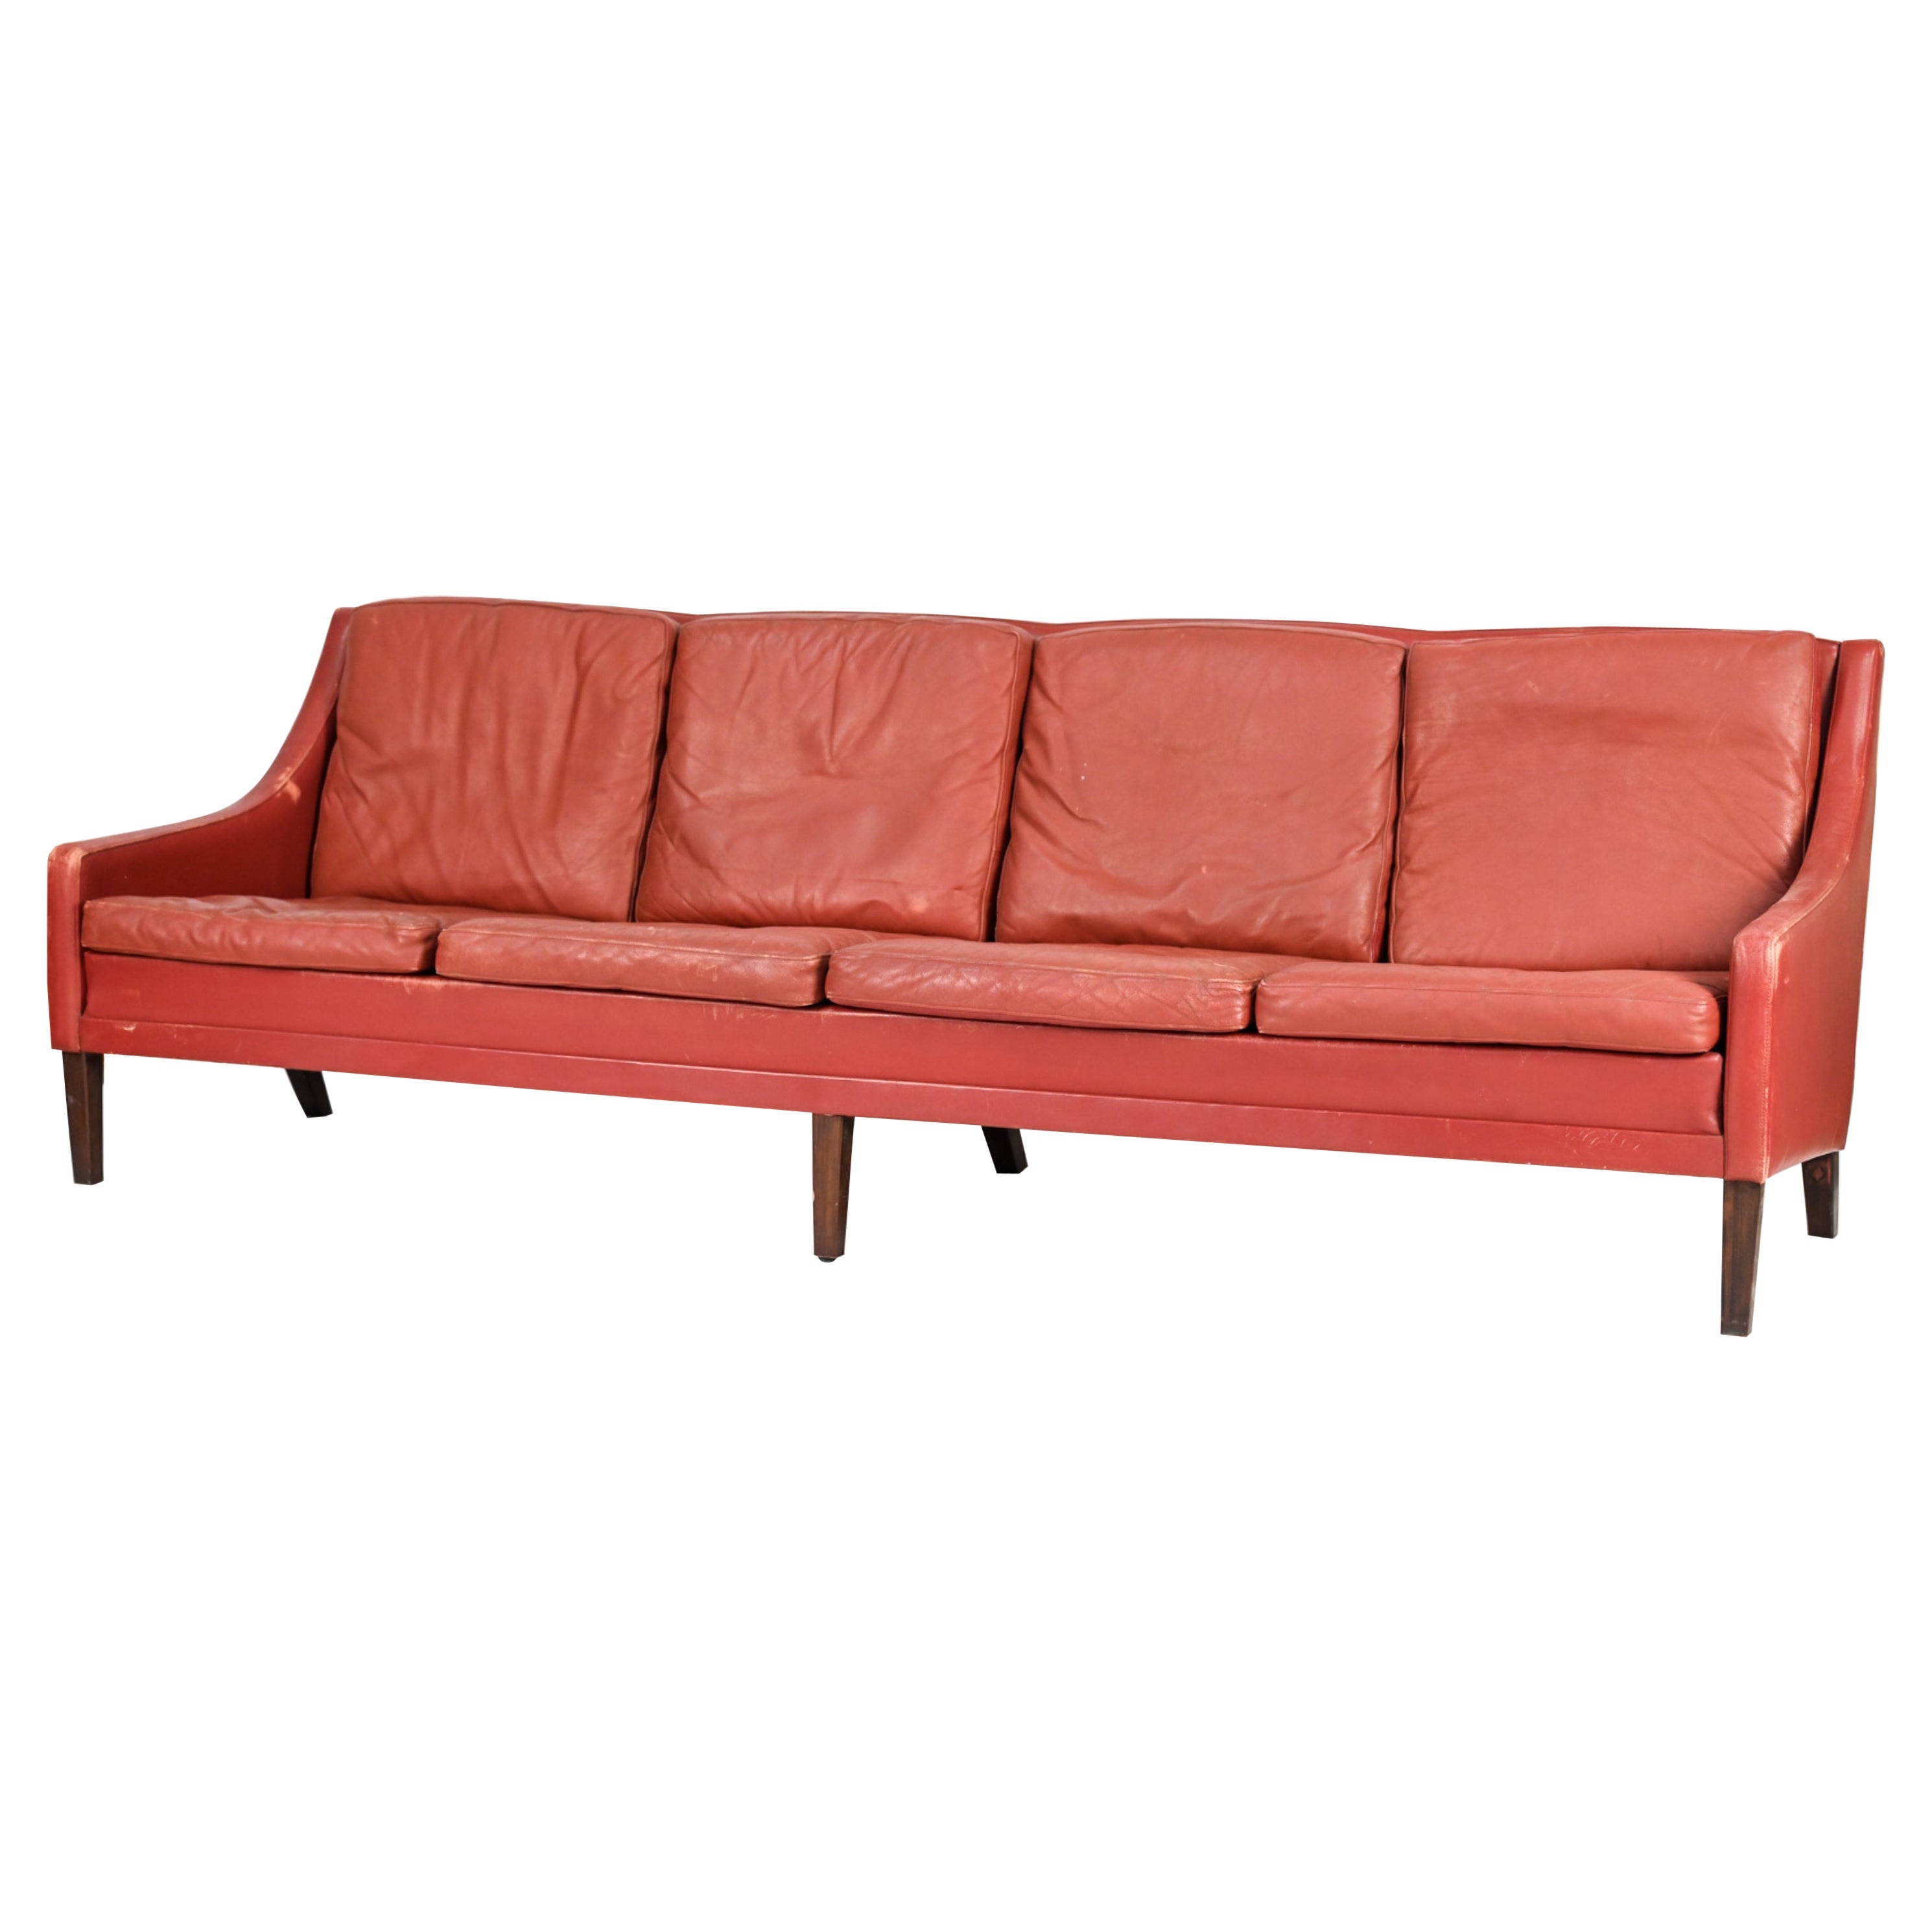 Danish Mid-Century 4-Seater Red Leather Sofa For Sale at 1stDibs